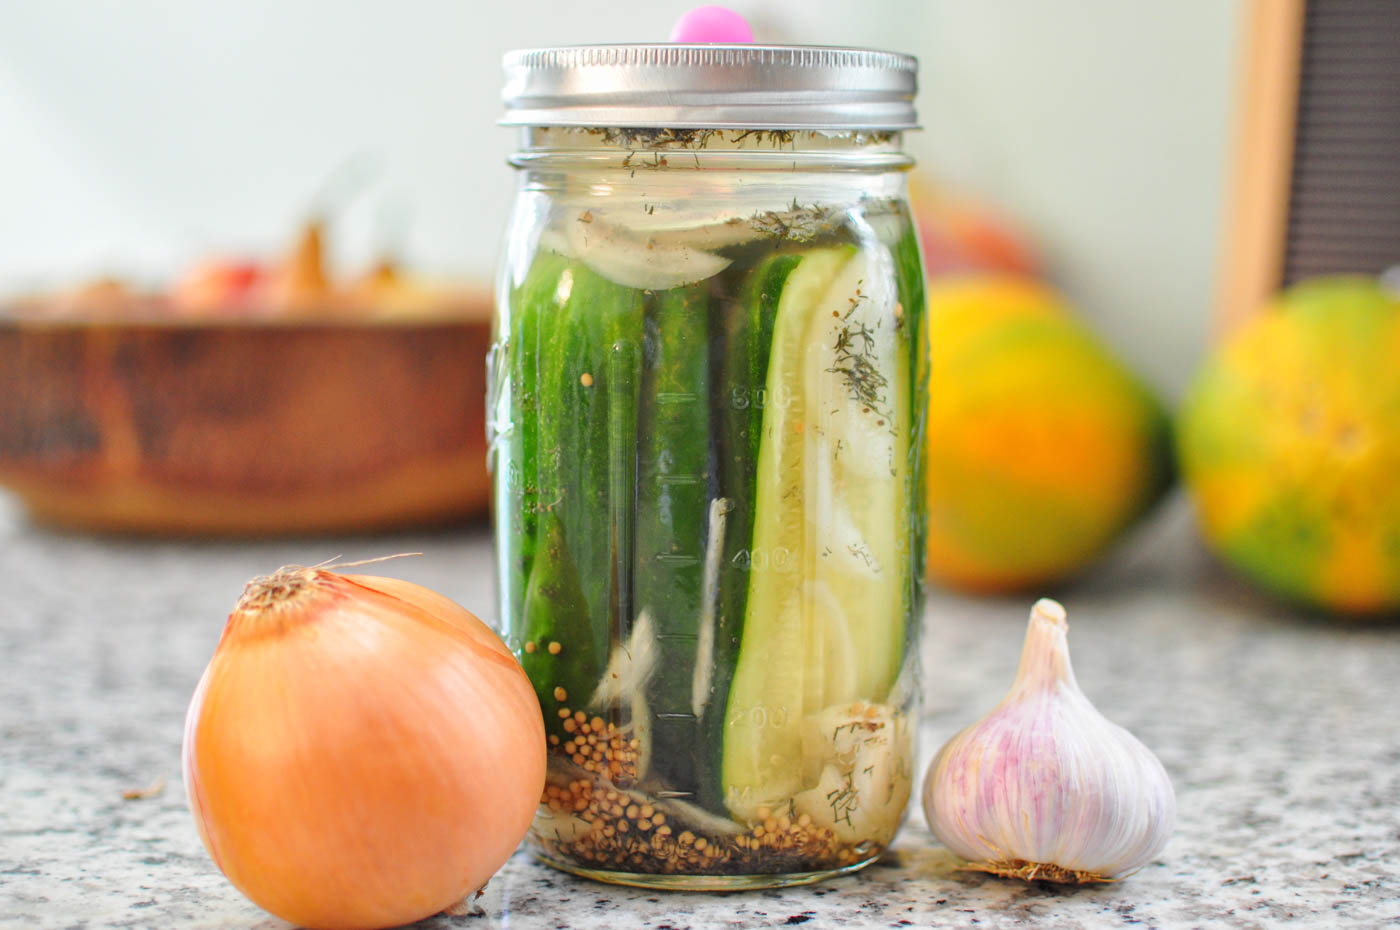 How to Make Lacto-Fermented Pickles Recipe